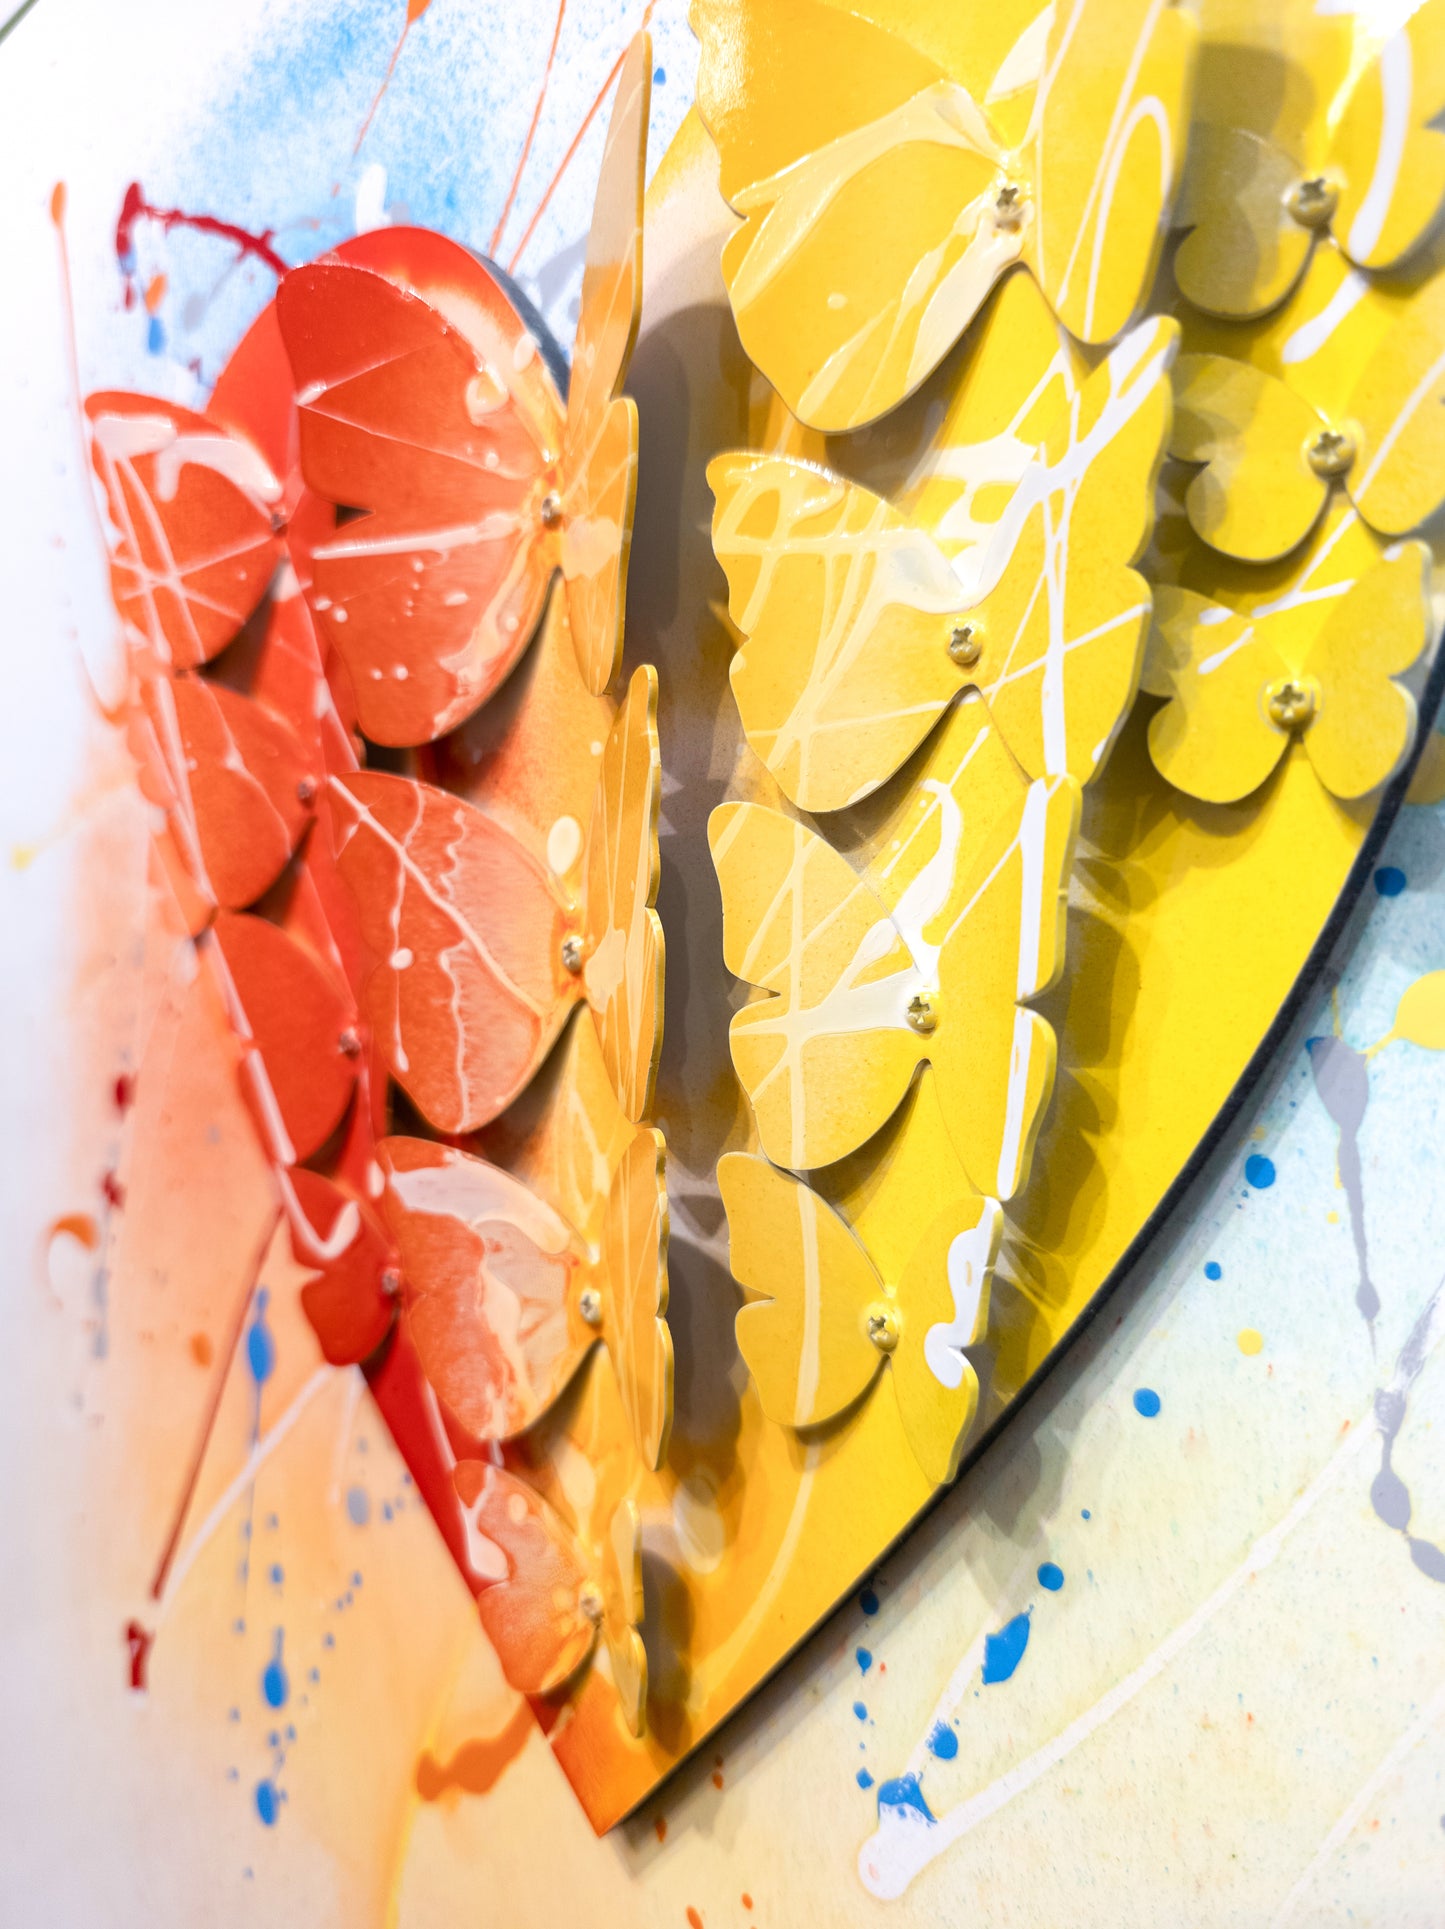 Right side view of Yellow & Red Heart artwork